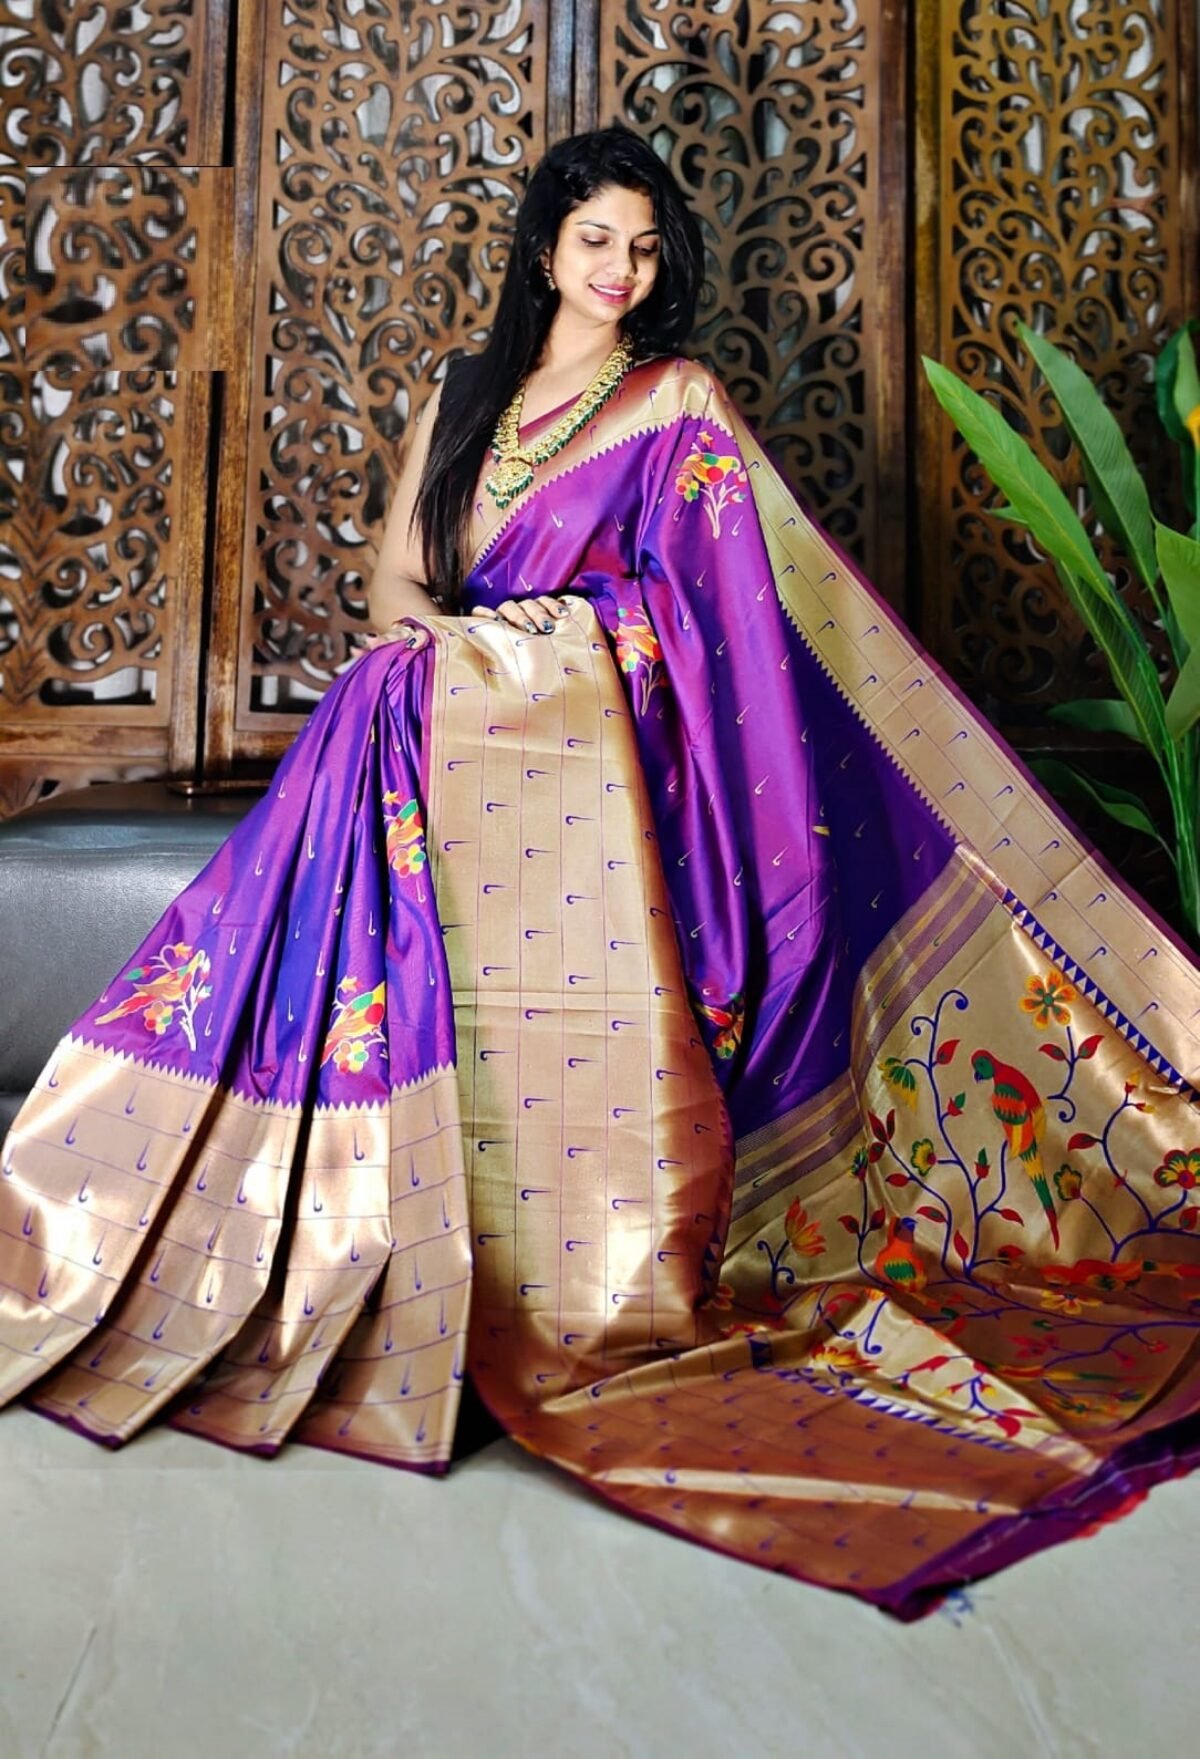 Panghat - Draw endearing glances of passer-by with this #peach lehenga style  #saree. For details: http://goo.gl/cmPlJw For more #designer collection:  www.panghatsarees.com #Sarees #designersaree #couture #exclusivecollection  #traditionalwear ...